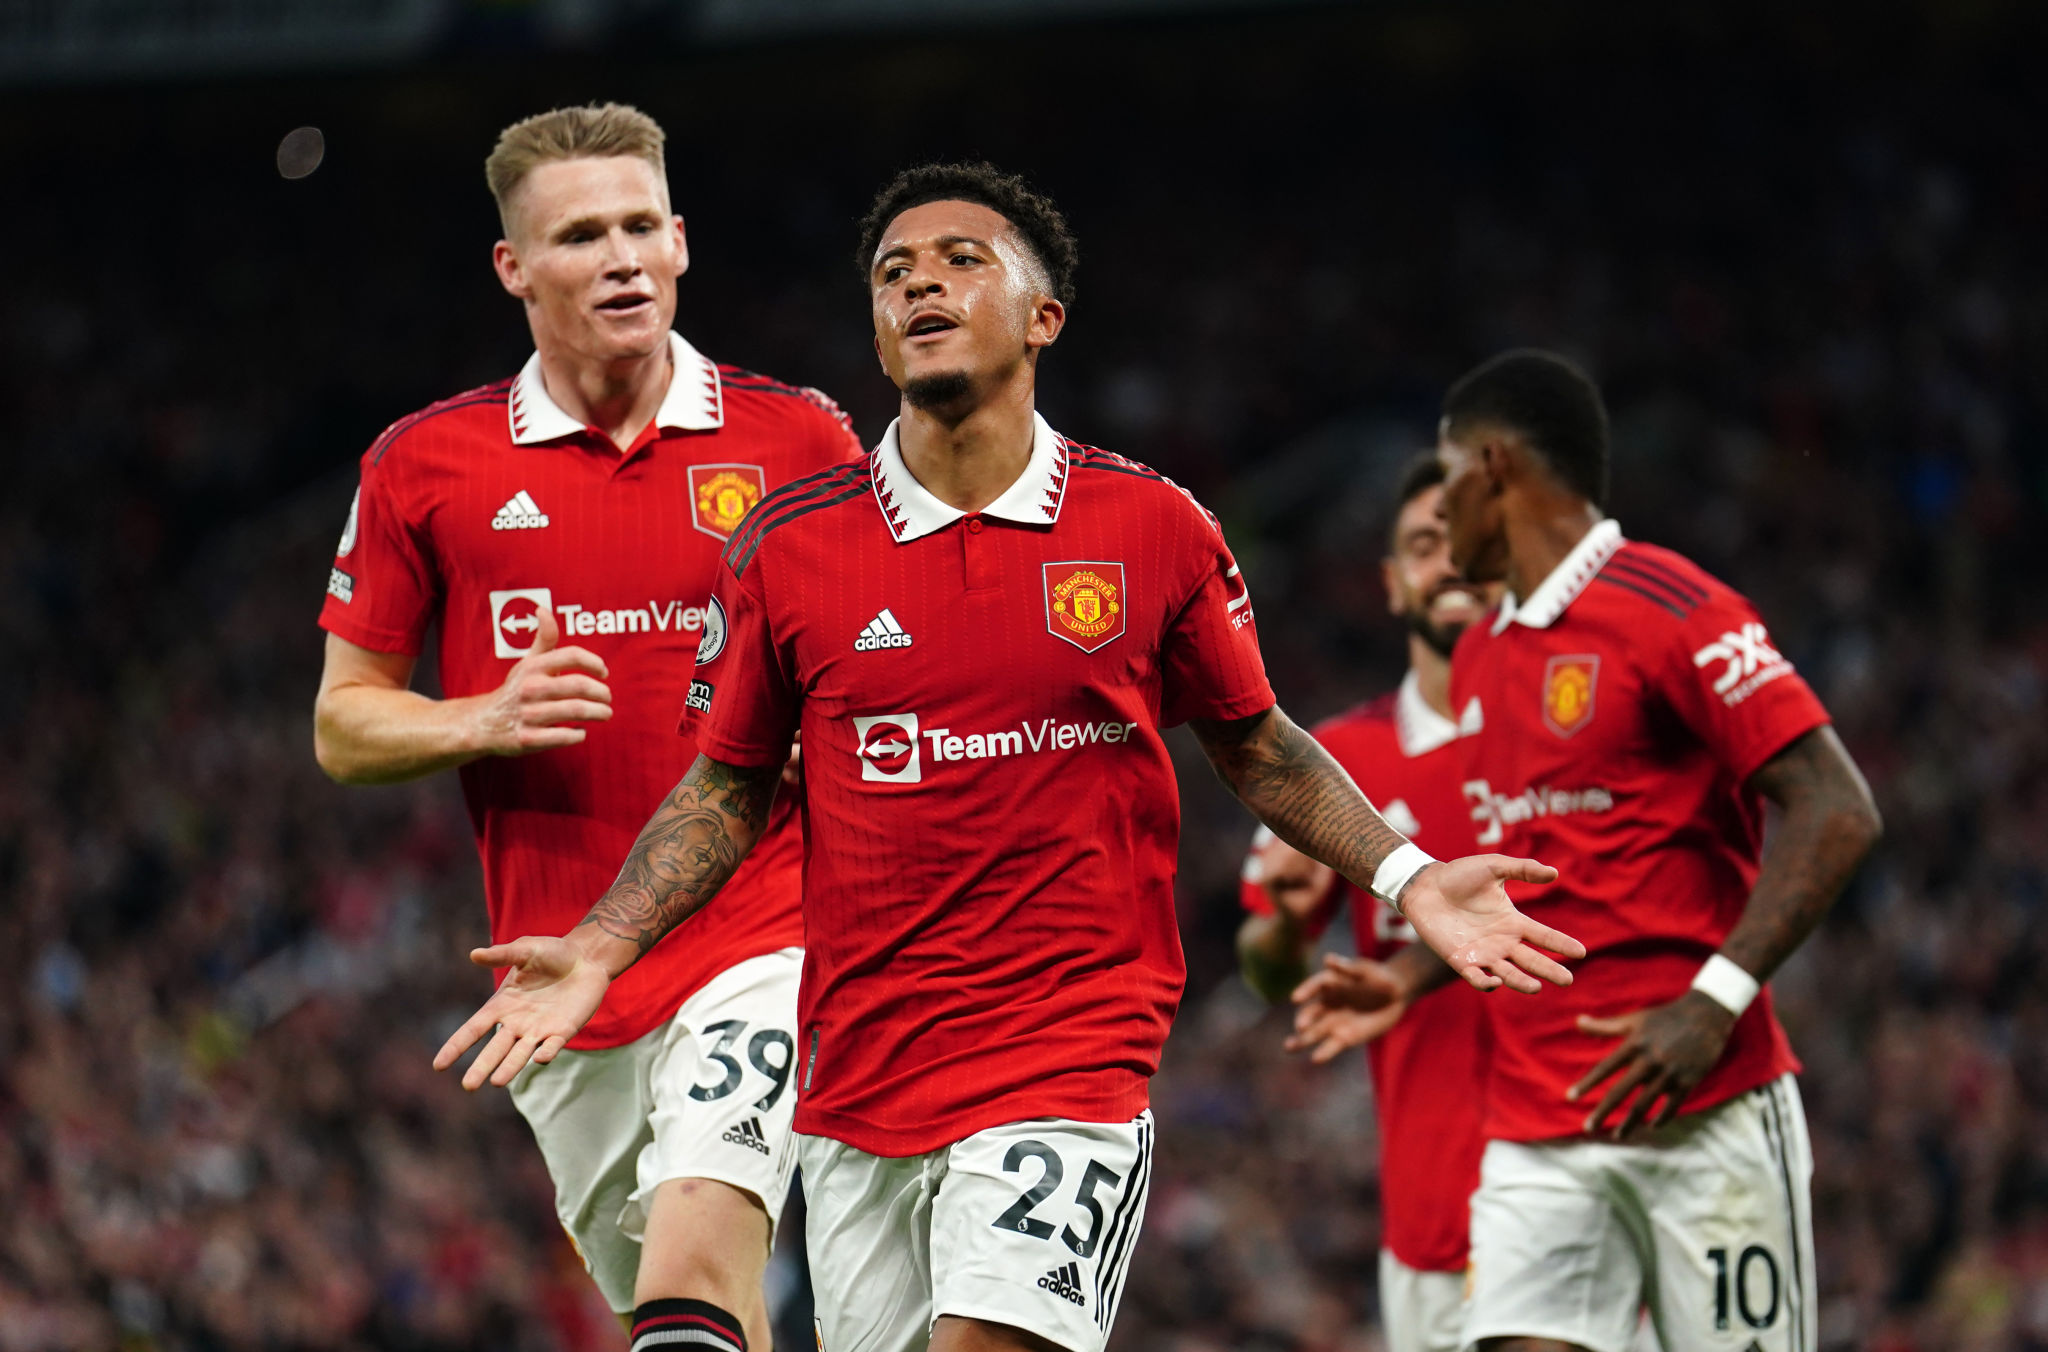 Man United vs Liverpool Highlights: MUN 2-1 LIV, Erik ten Hag claims first victory as Red Devils beat Liverpool in a feisty 2-1 win, Marcus Rashford with the winning goal, Check Manchester United beat Liverpool HIGHLIGHTS